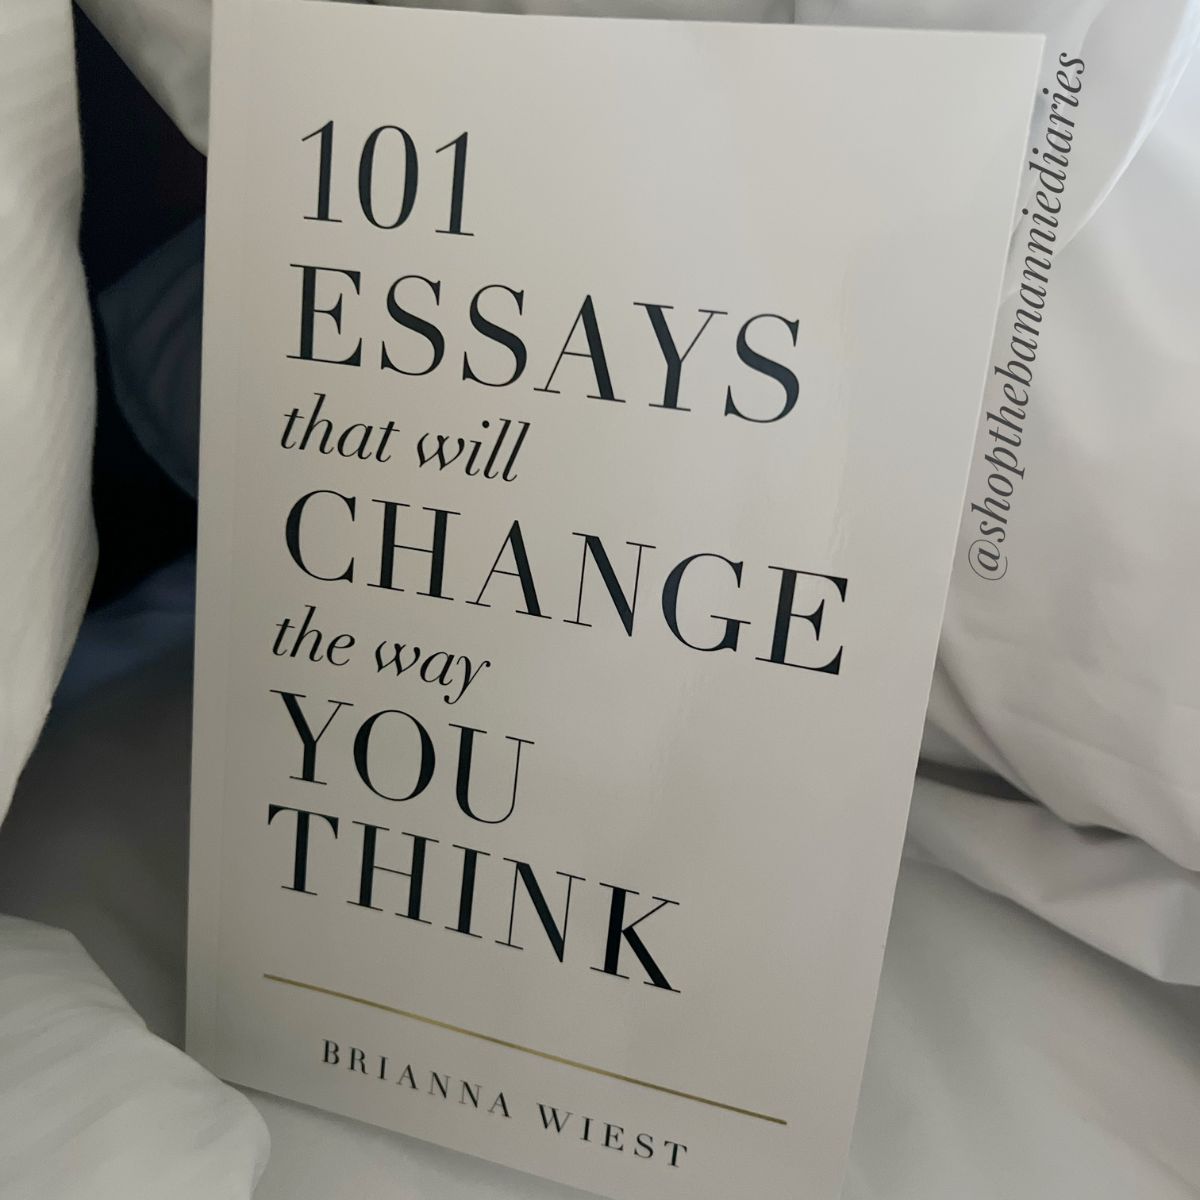 101 Essays That Will Change The Way You Think - Soft Cover, Regular Edition, by Brianna Wiest, Published by Thought Catalog, 448 Pages